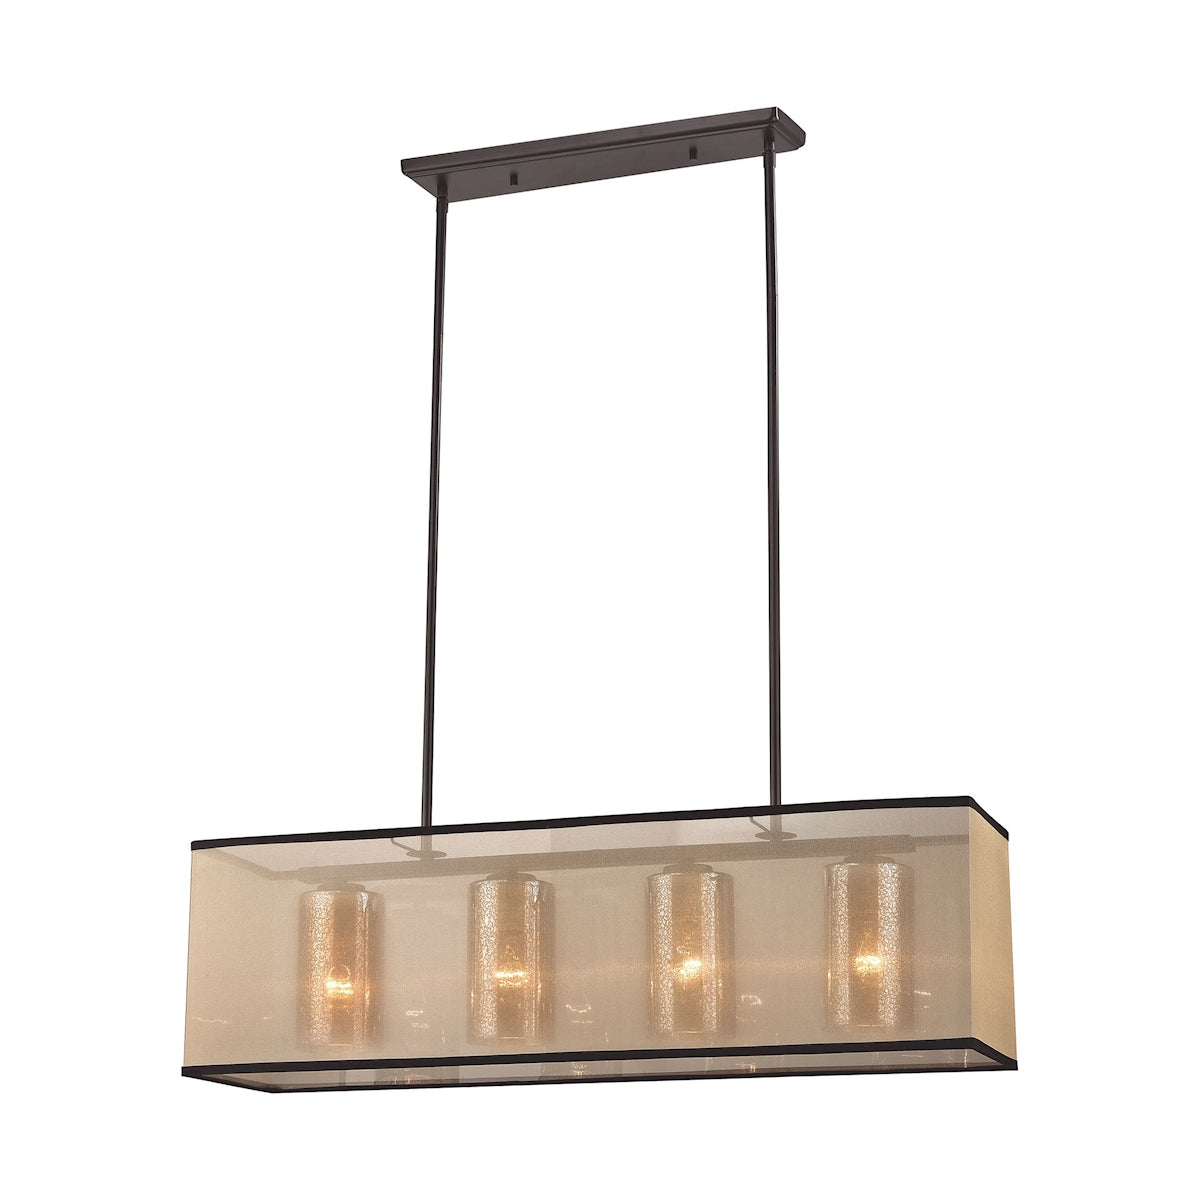 ELK Lighting 57028/4 Diffusion 4-Light Chandelier in Oiled Bronze with Organza and Mercury Glass